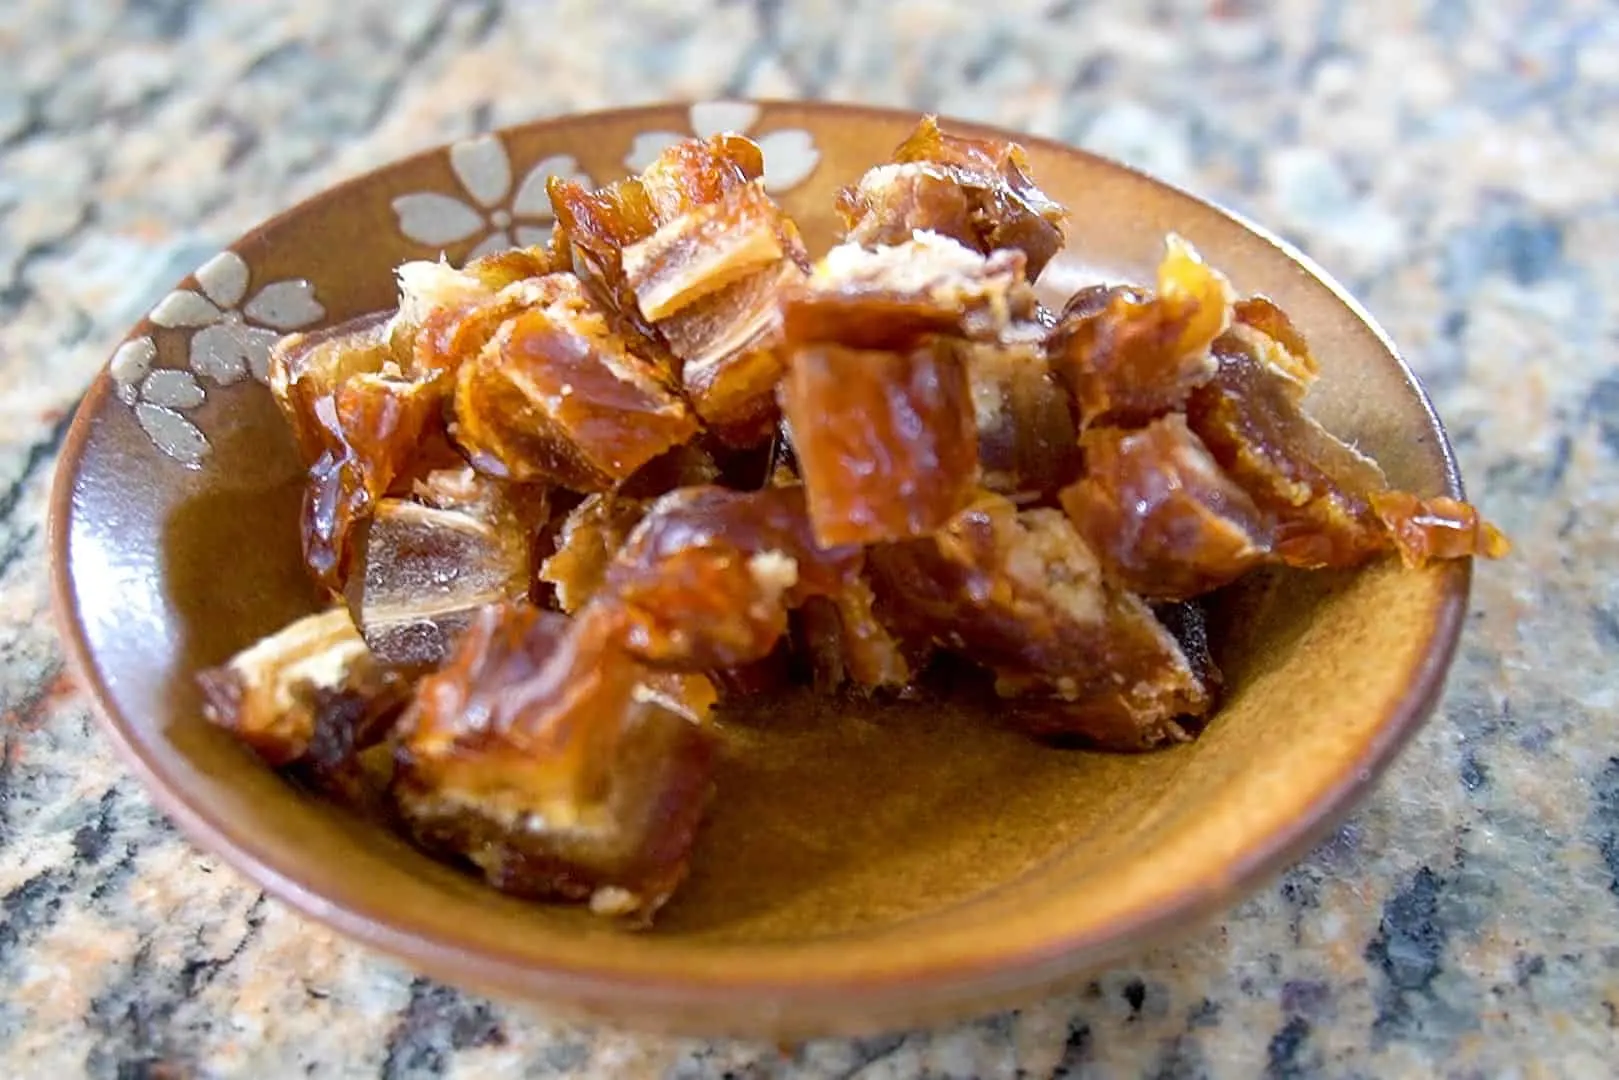 Chopped dates in a bowl